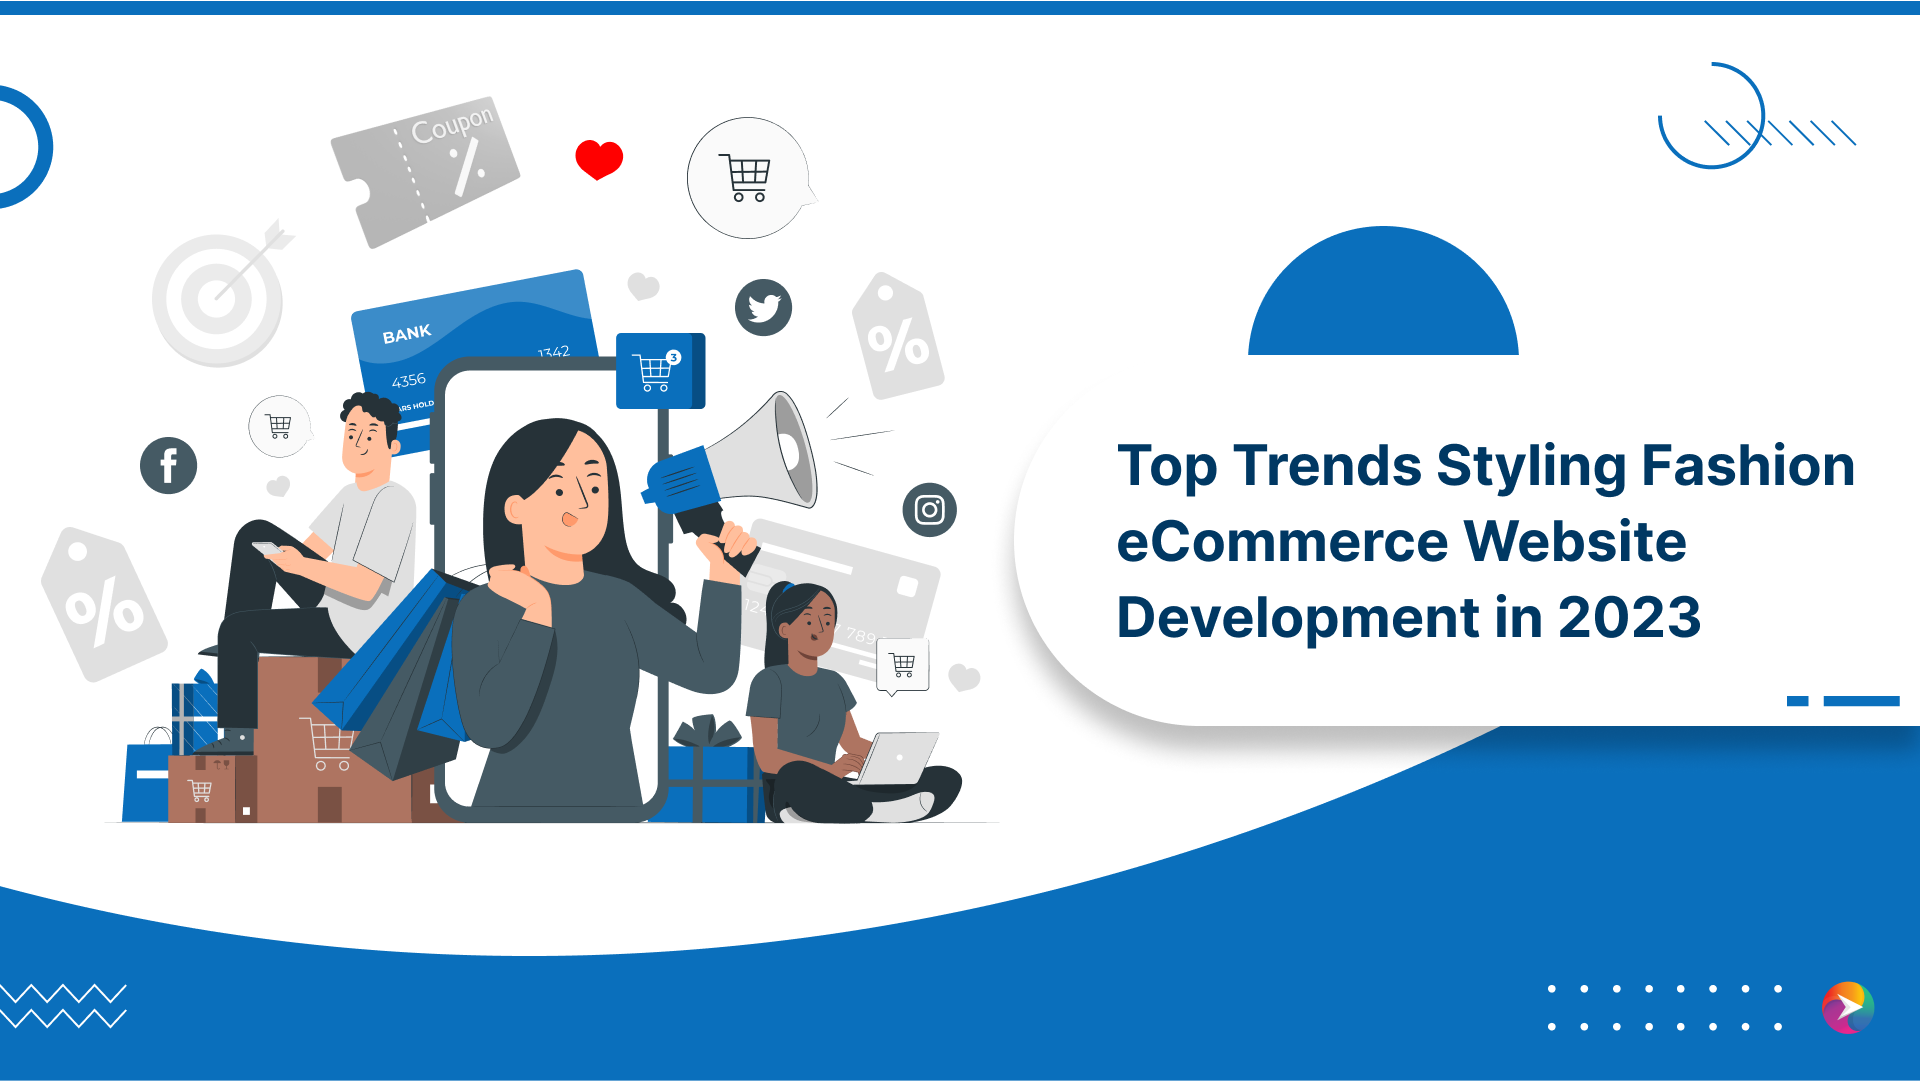 Top Trends Styling Fashion eCommerce Website Development in 2023